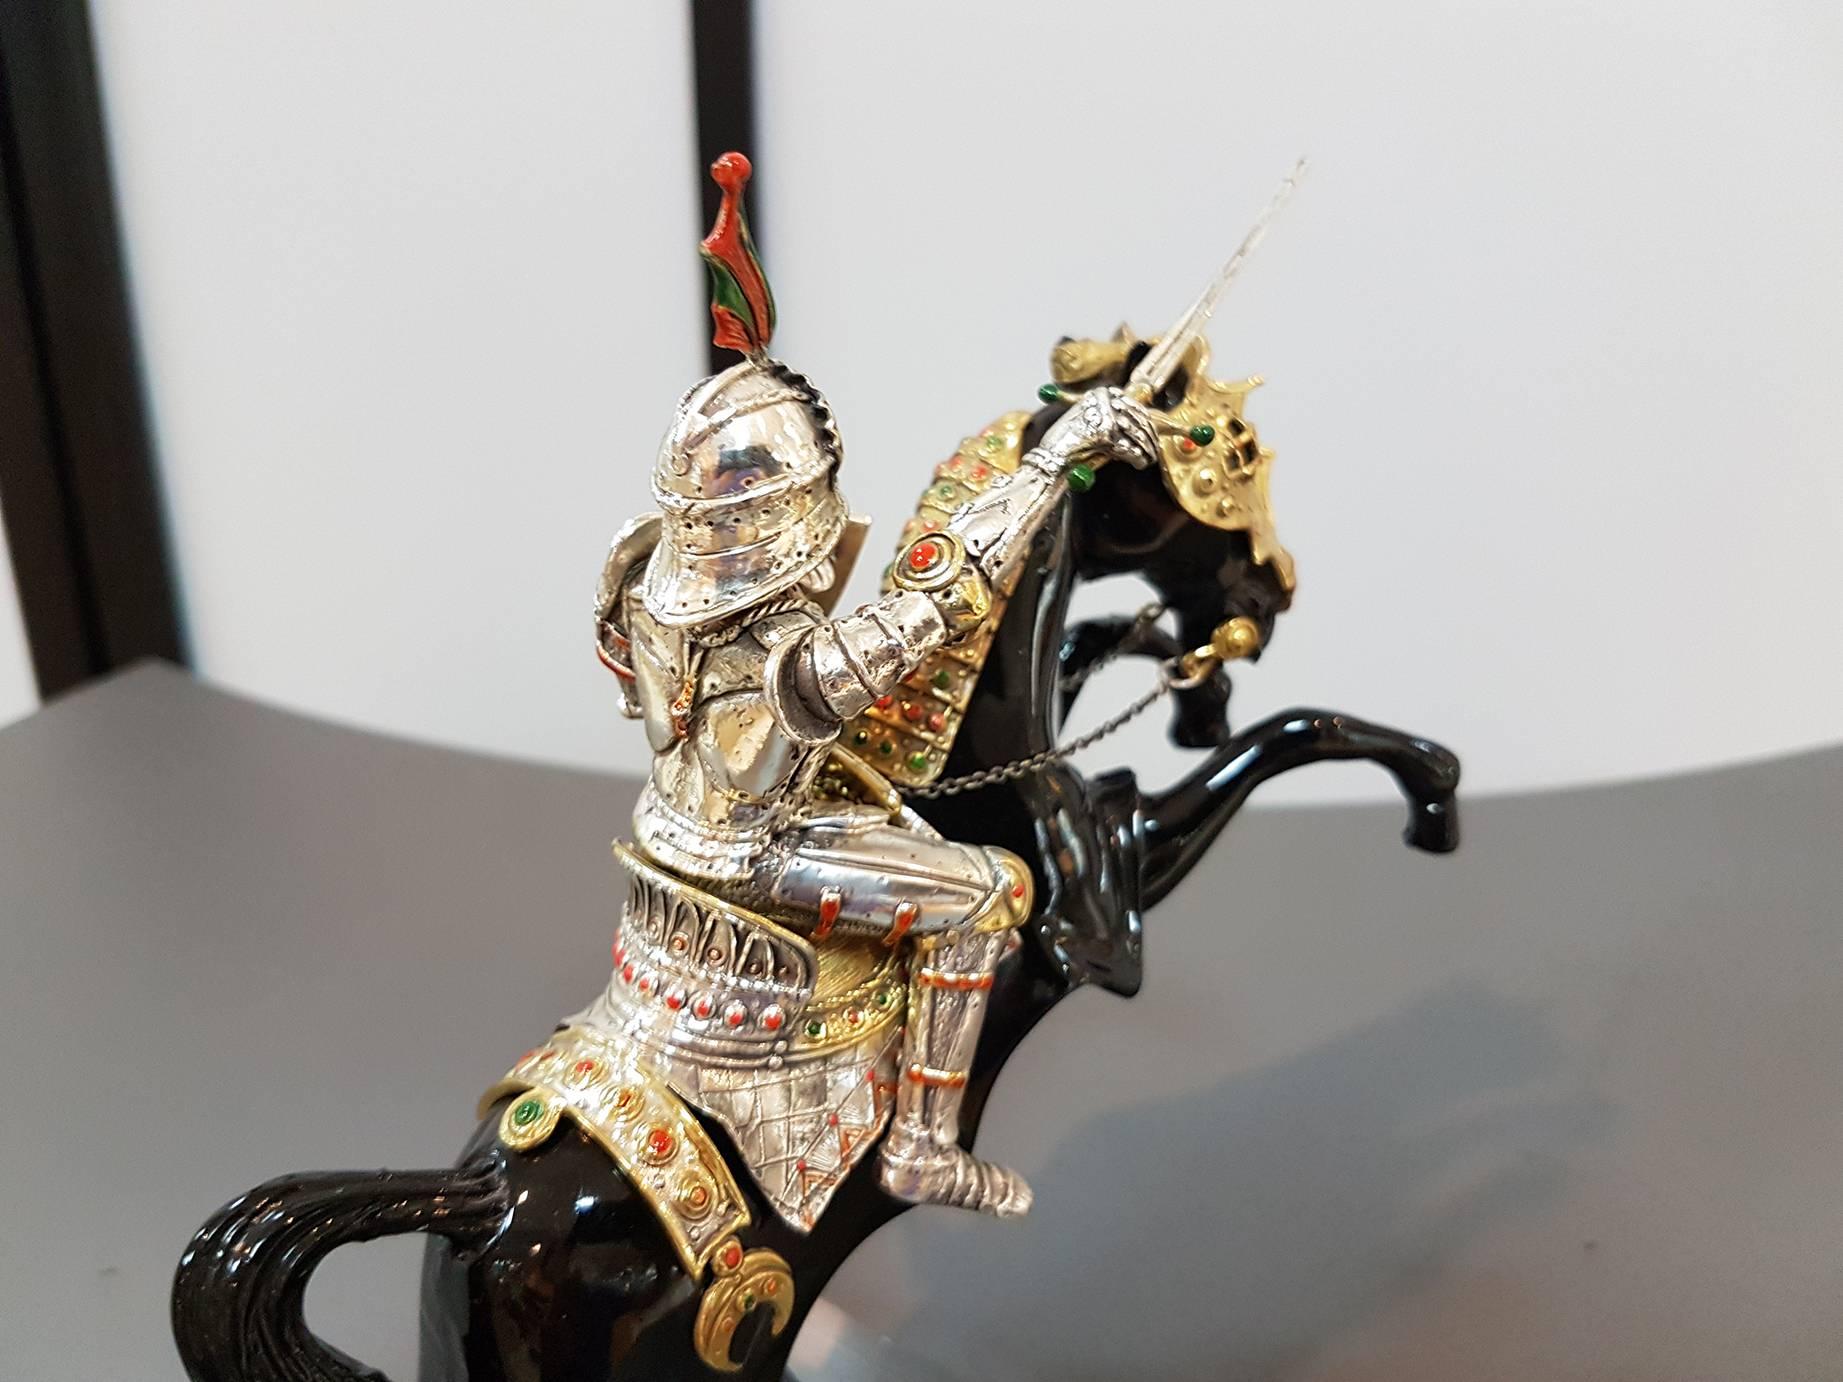 Horse in black lacquered resin with a sterling silver armor with Russian 14th century knight in sterling silver armor with golden and enameled details.
